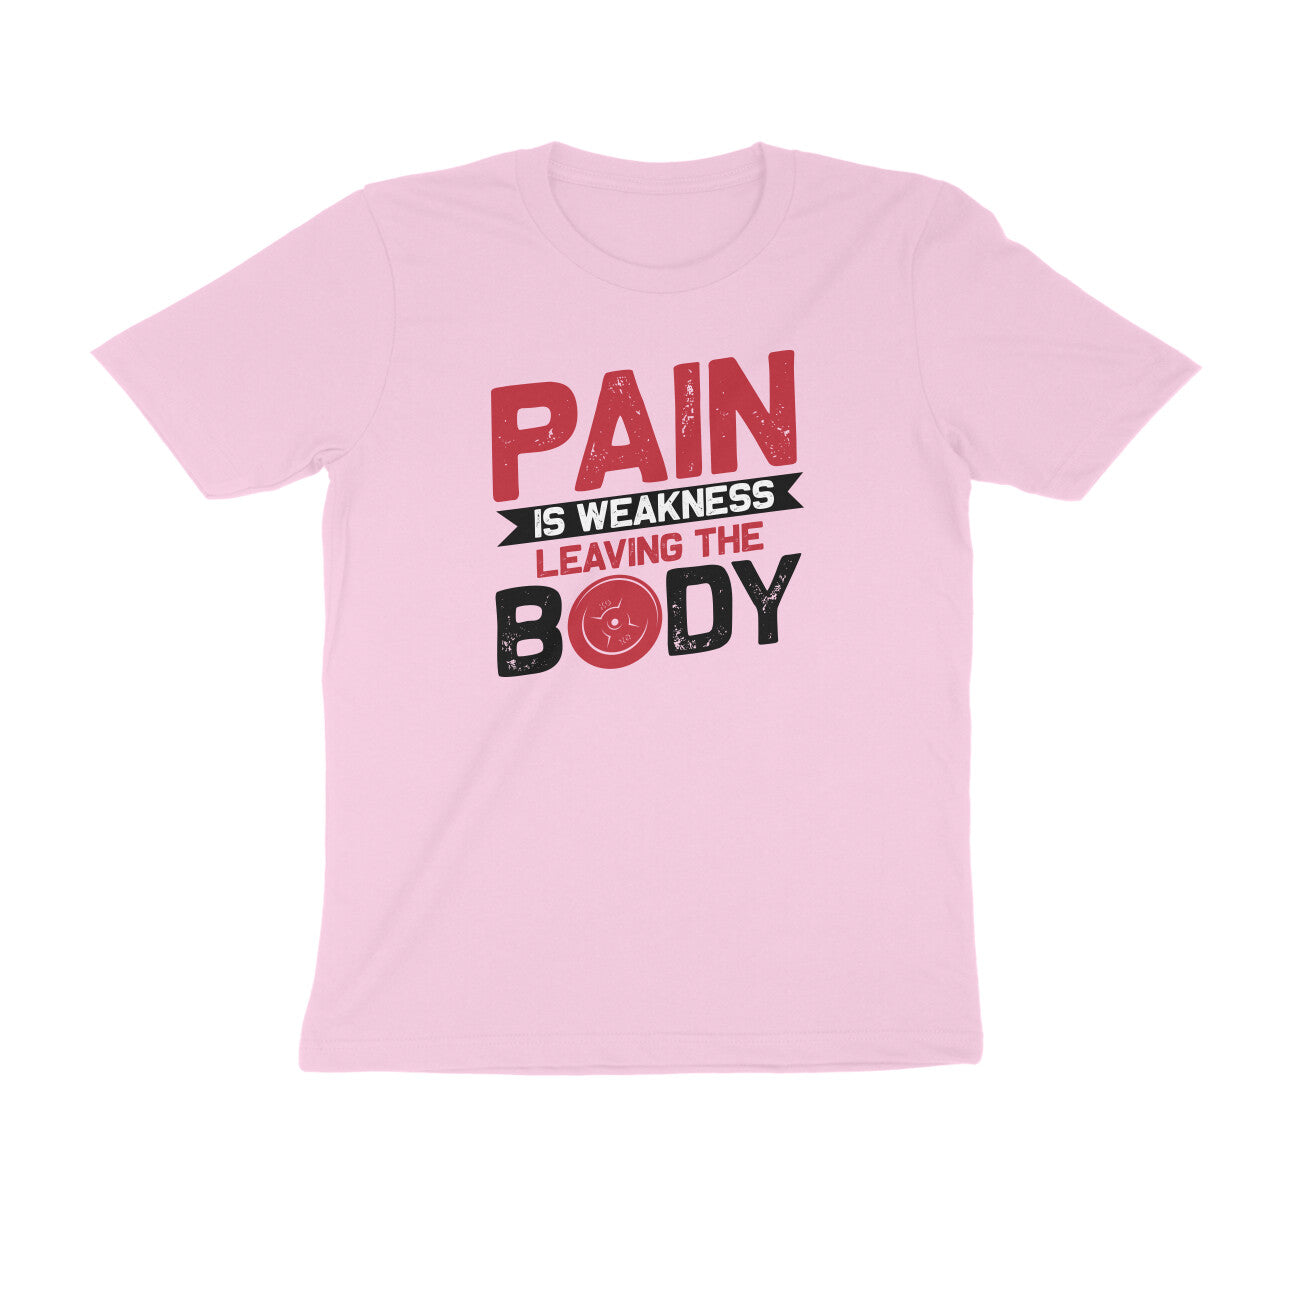 TNH - Men's Round Neck Tshirt - Pain Is Weakness Leaving the Body